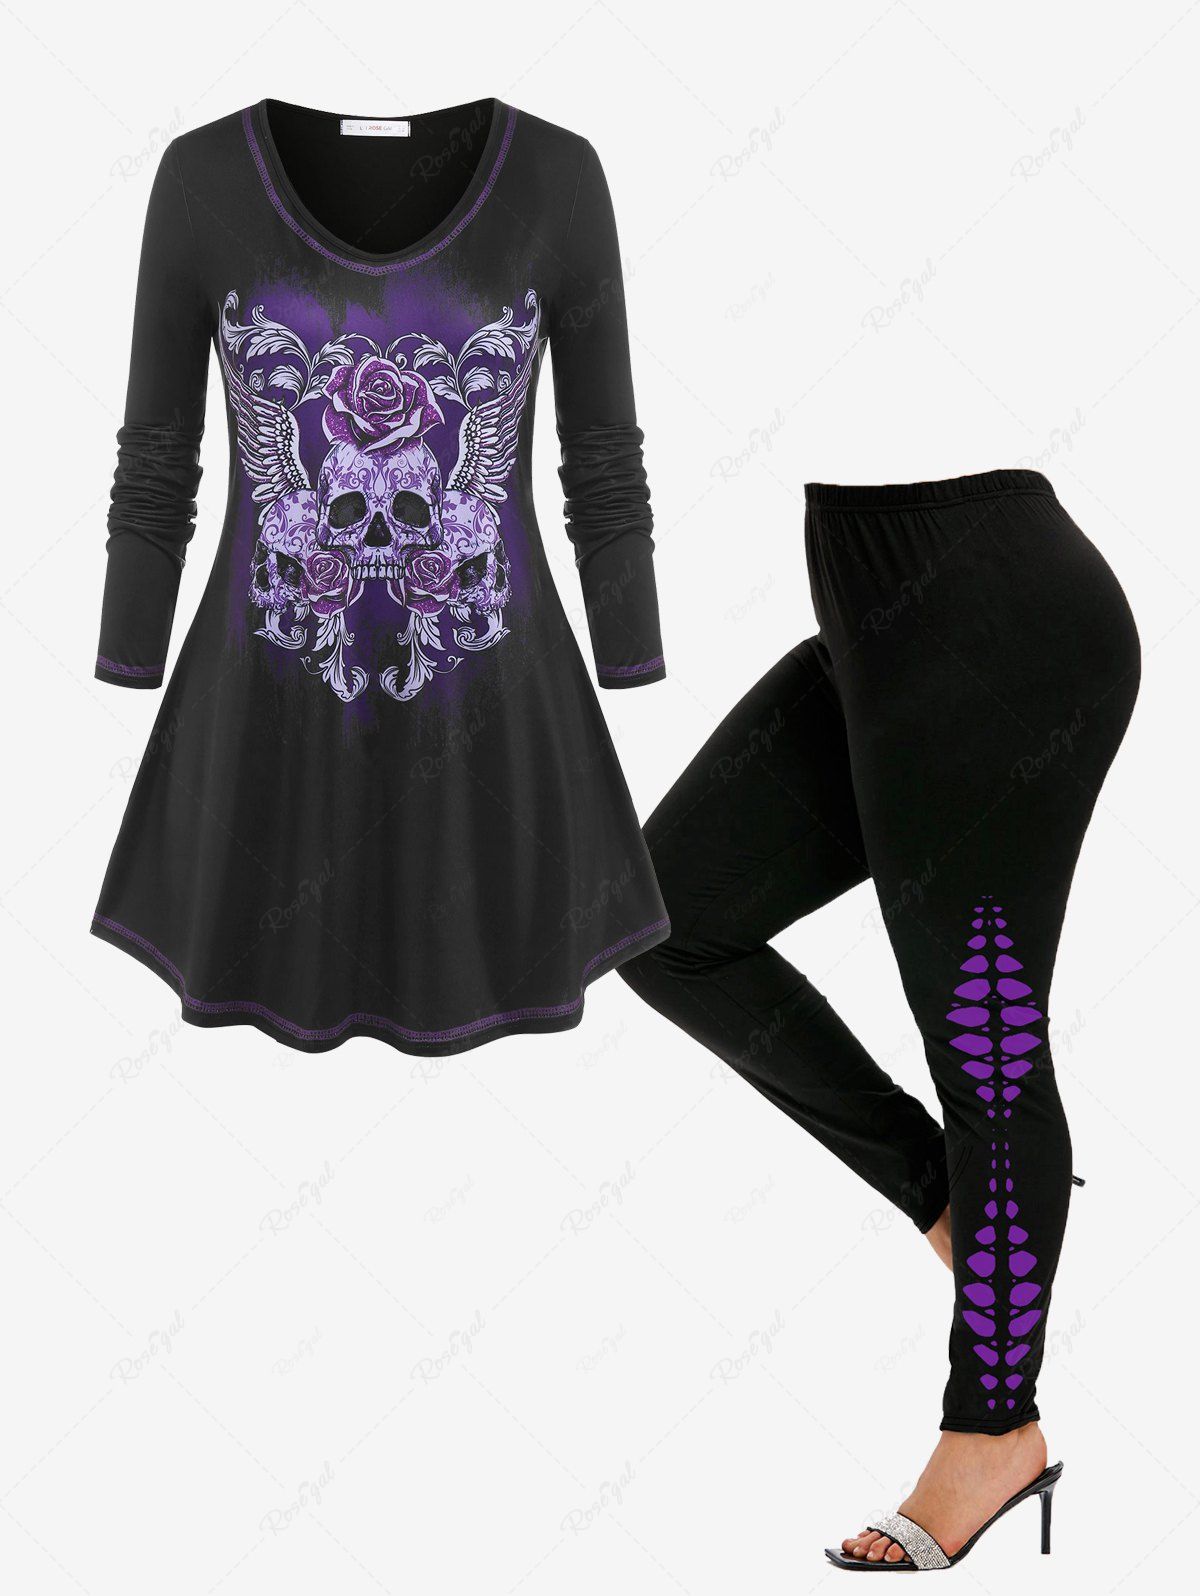 Best Gothic Skull Flower Tunic Tee and Skeleton Printed Leggings Outfit  